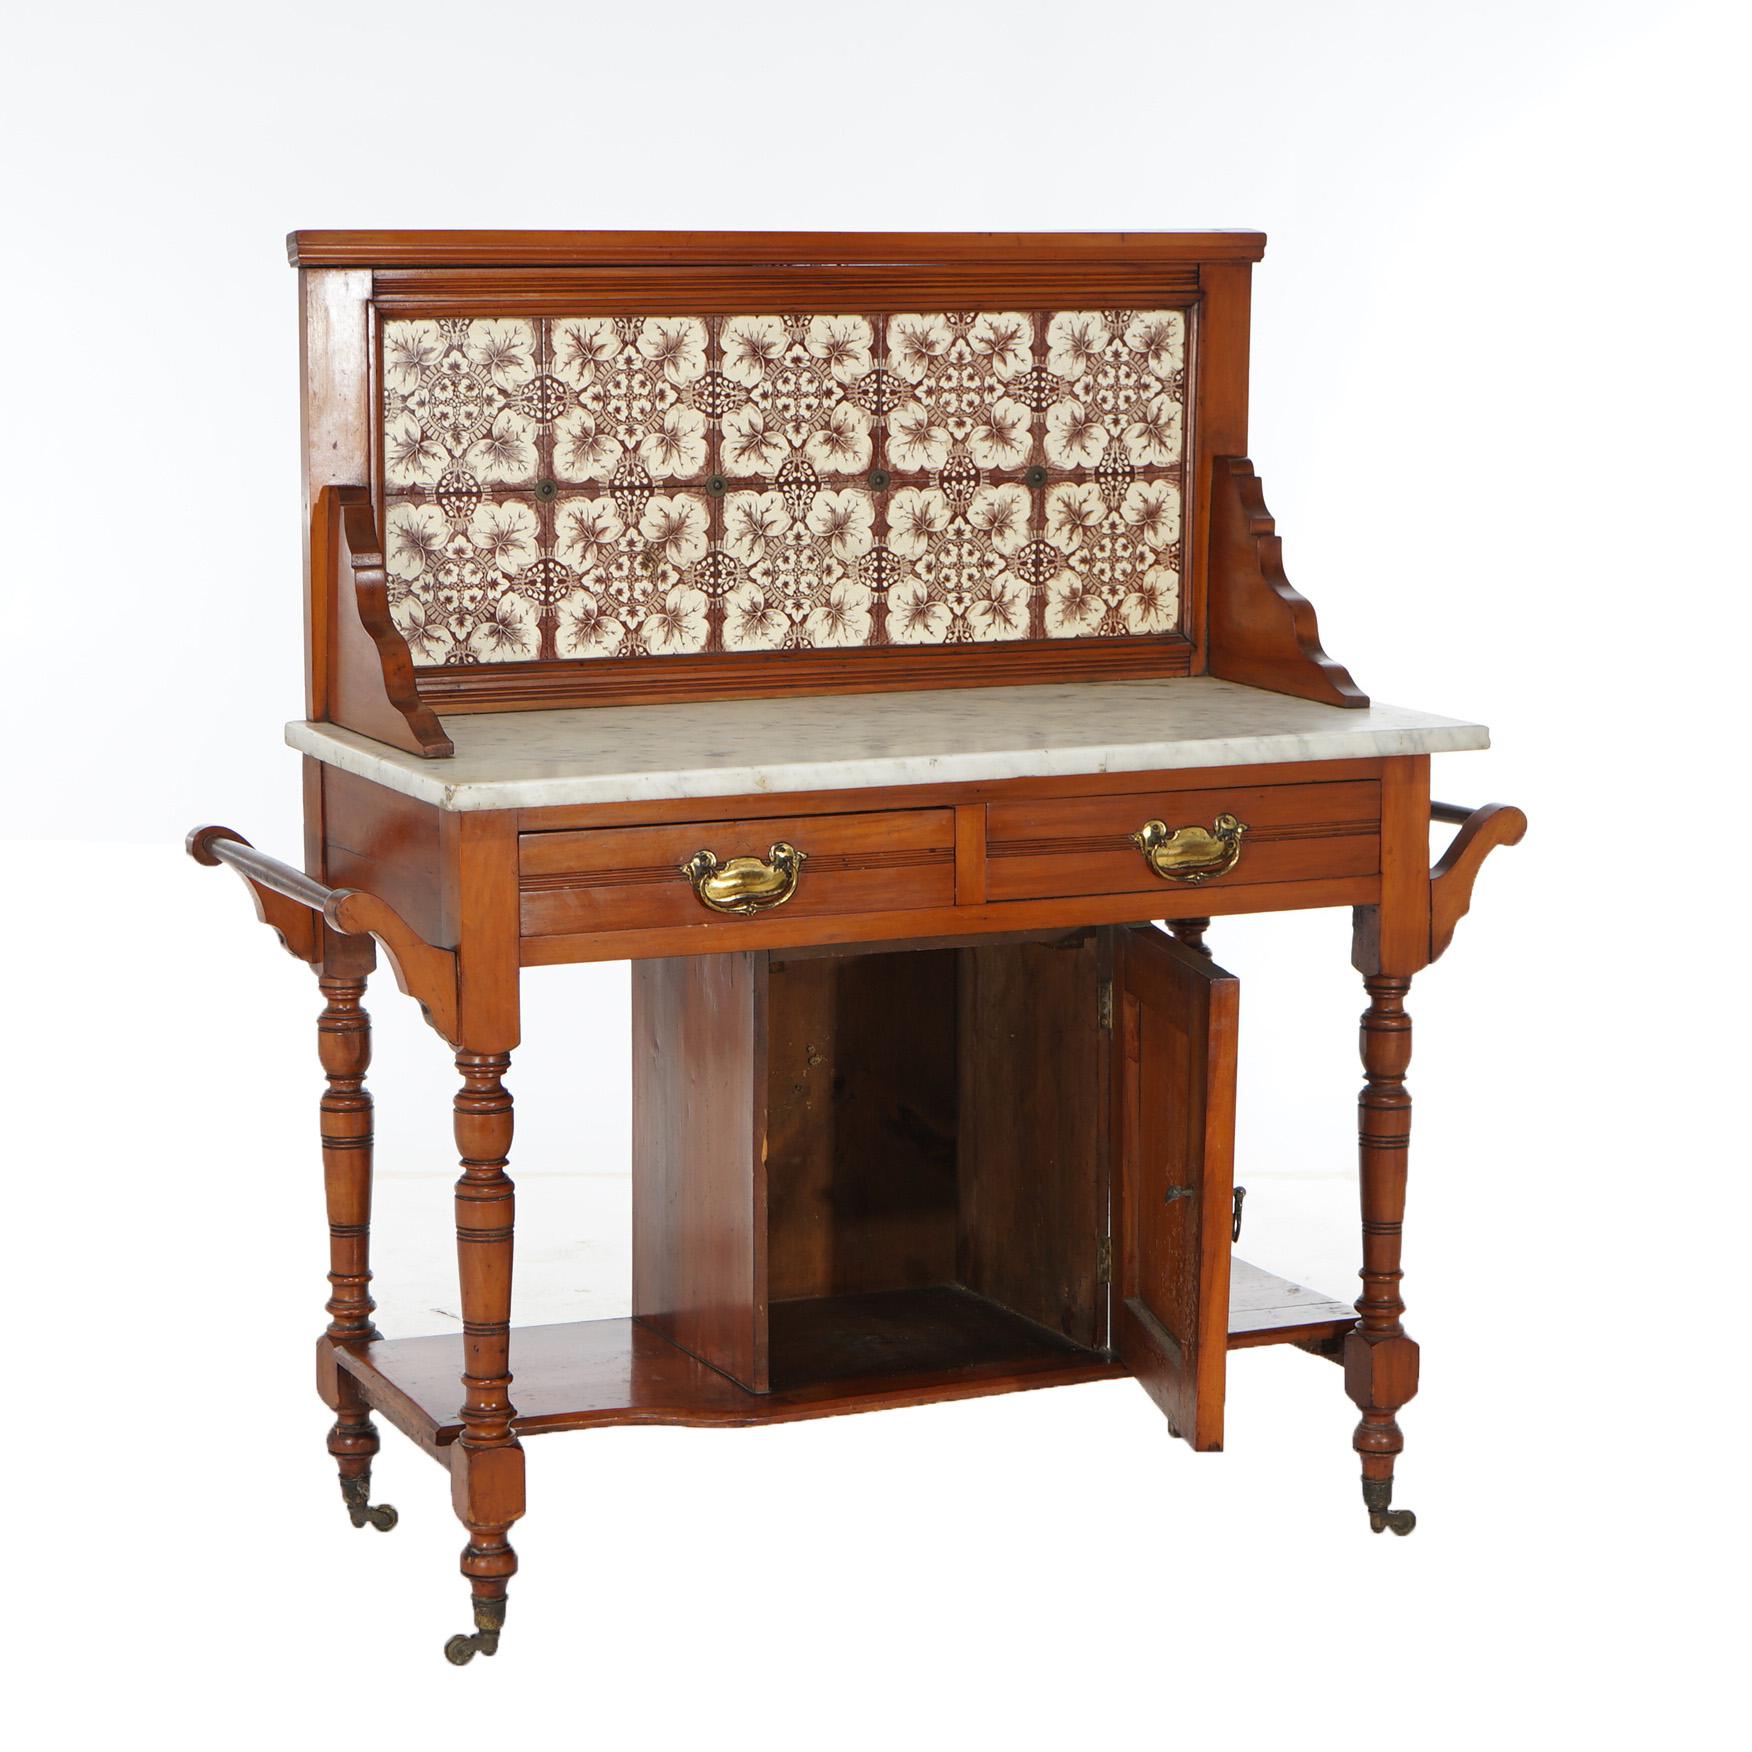 An antique English wash stand or dry sink offers chestnut construction with tile backsplash over marble top case having double doors opening to blind storage compartment, lower central cabinet, and raised on turned legs with casters,